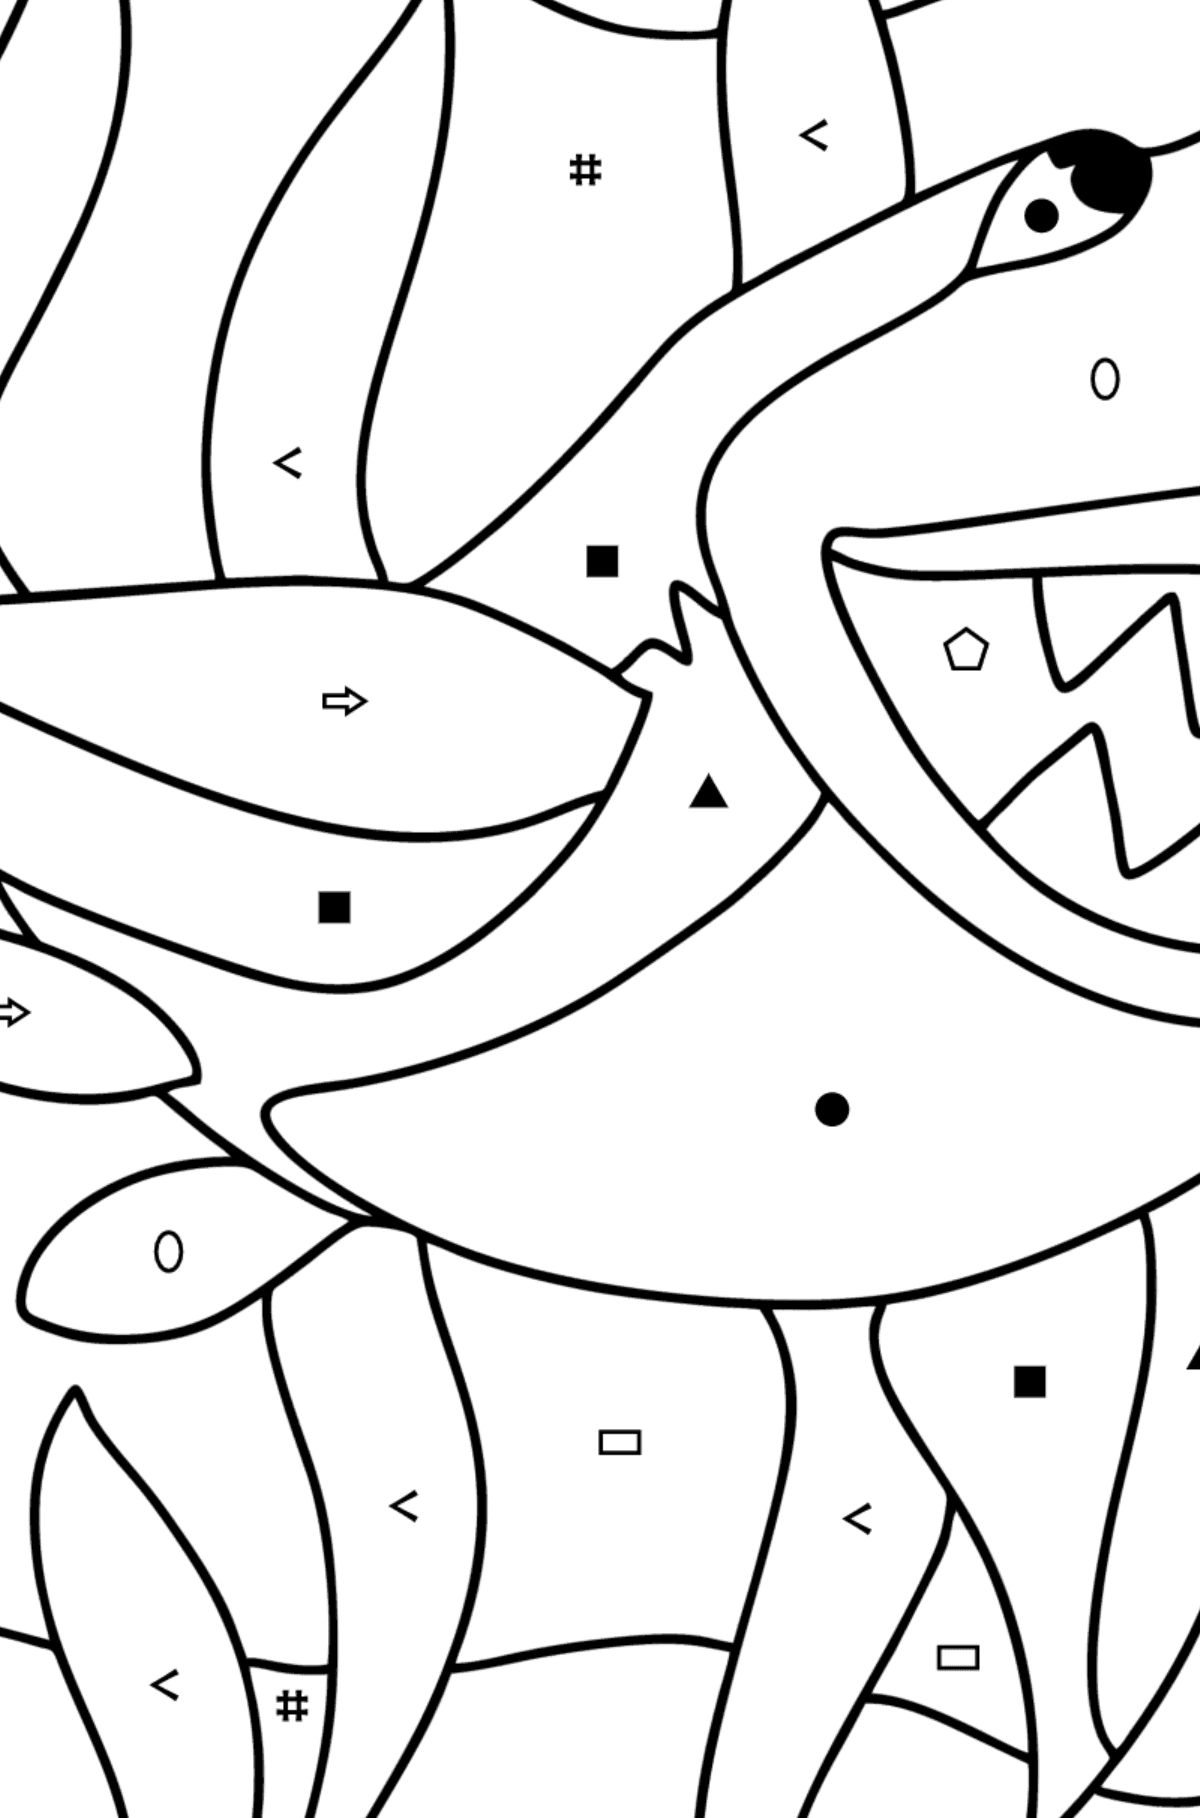 Shark coloring page - Coloring by Symbols and Geometric Shapes for Kids